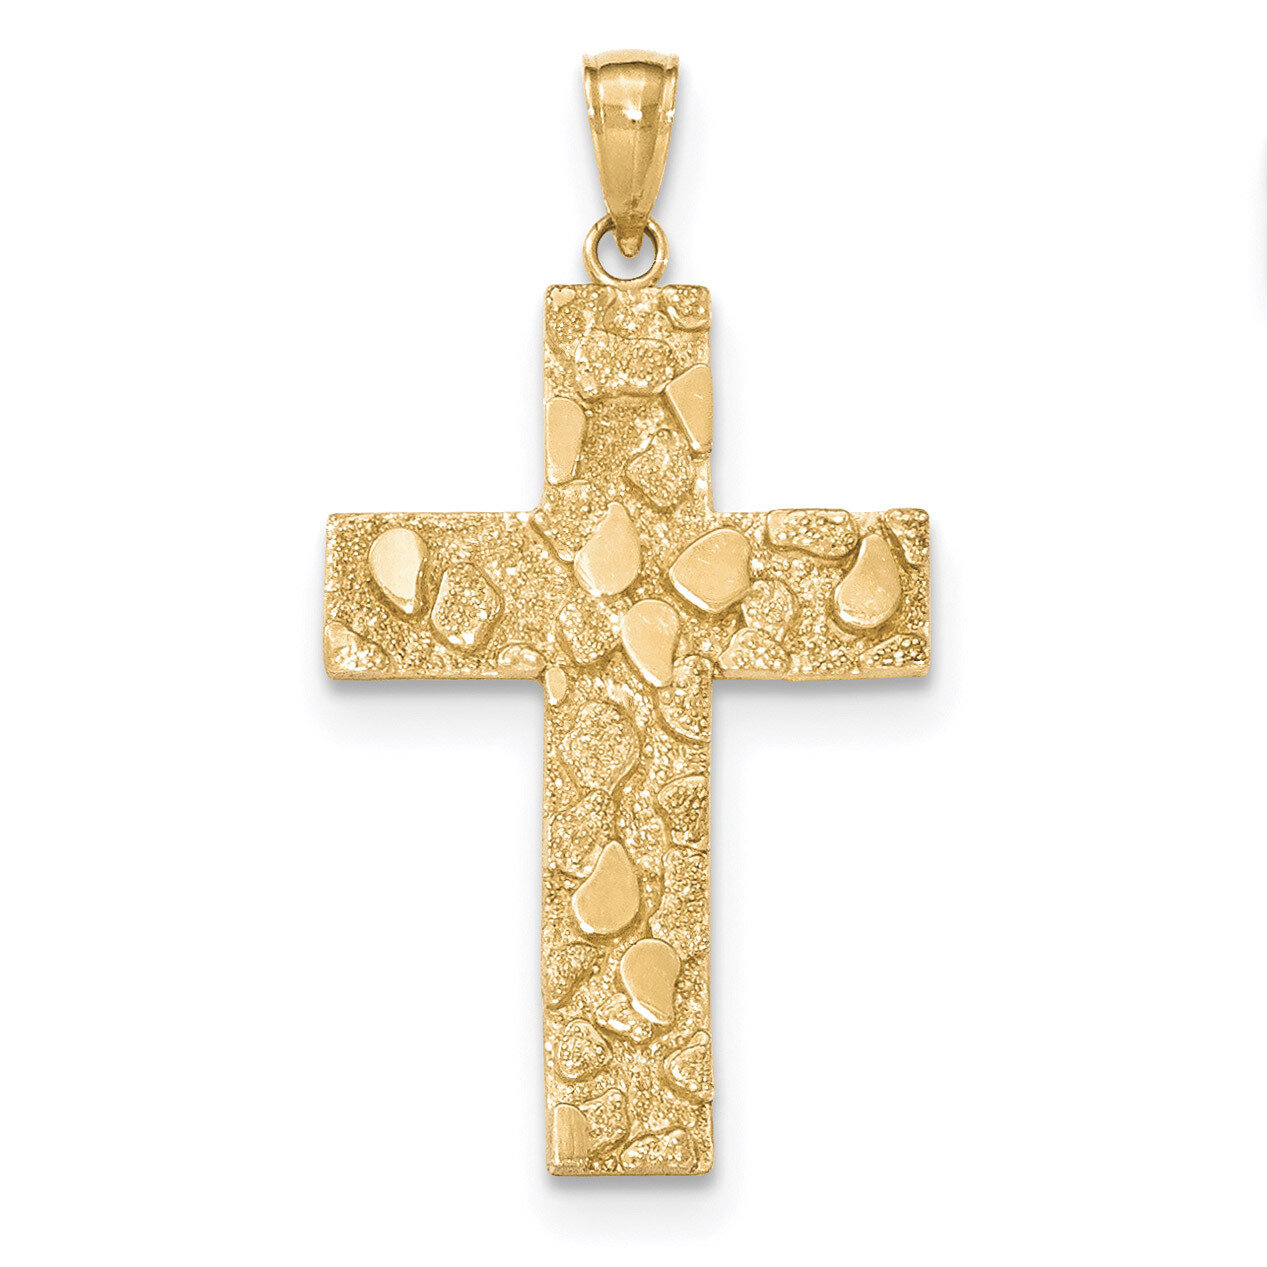 Textured Nugget Block Style Cross Pendant 14k Gold Polished K5451